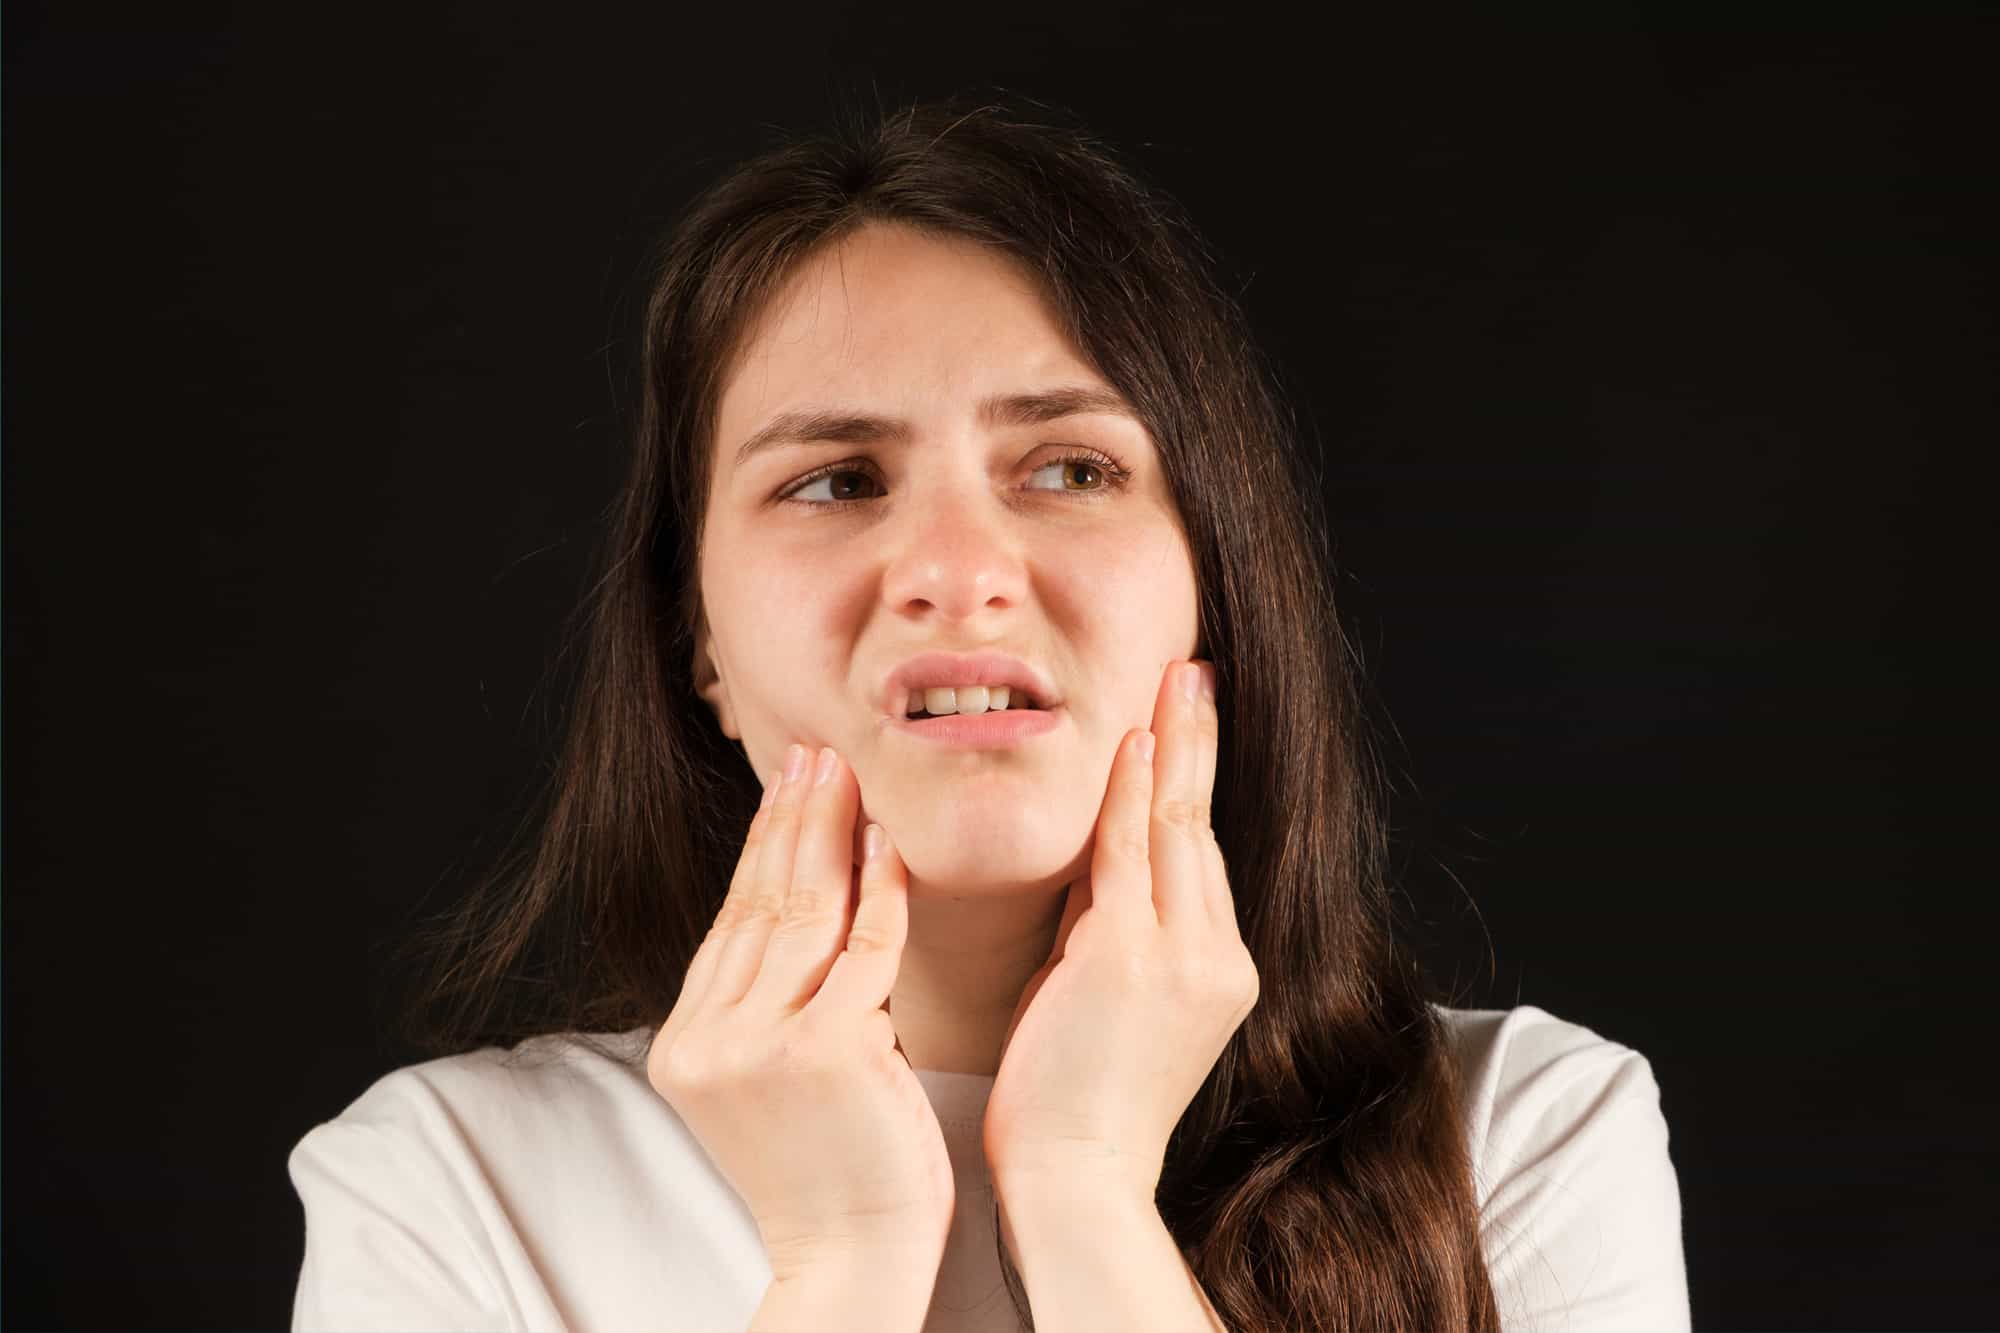 A young woman grimaces in pain and holds her jaw with her hands, implying TMJ pain, as she looks off to the side.